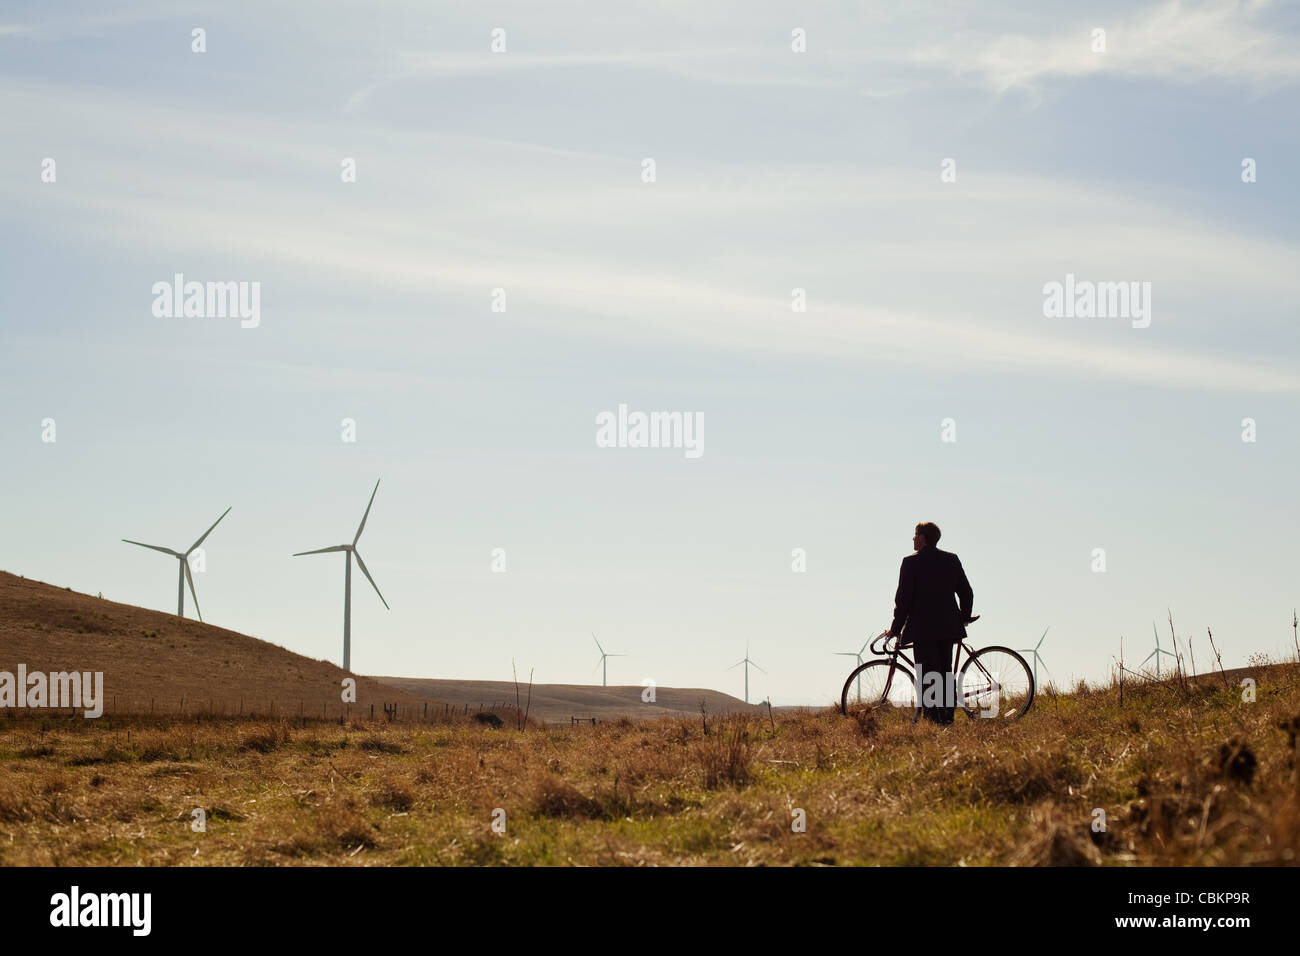 Distant view of man by bicycle watching wind farm Stock Photo